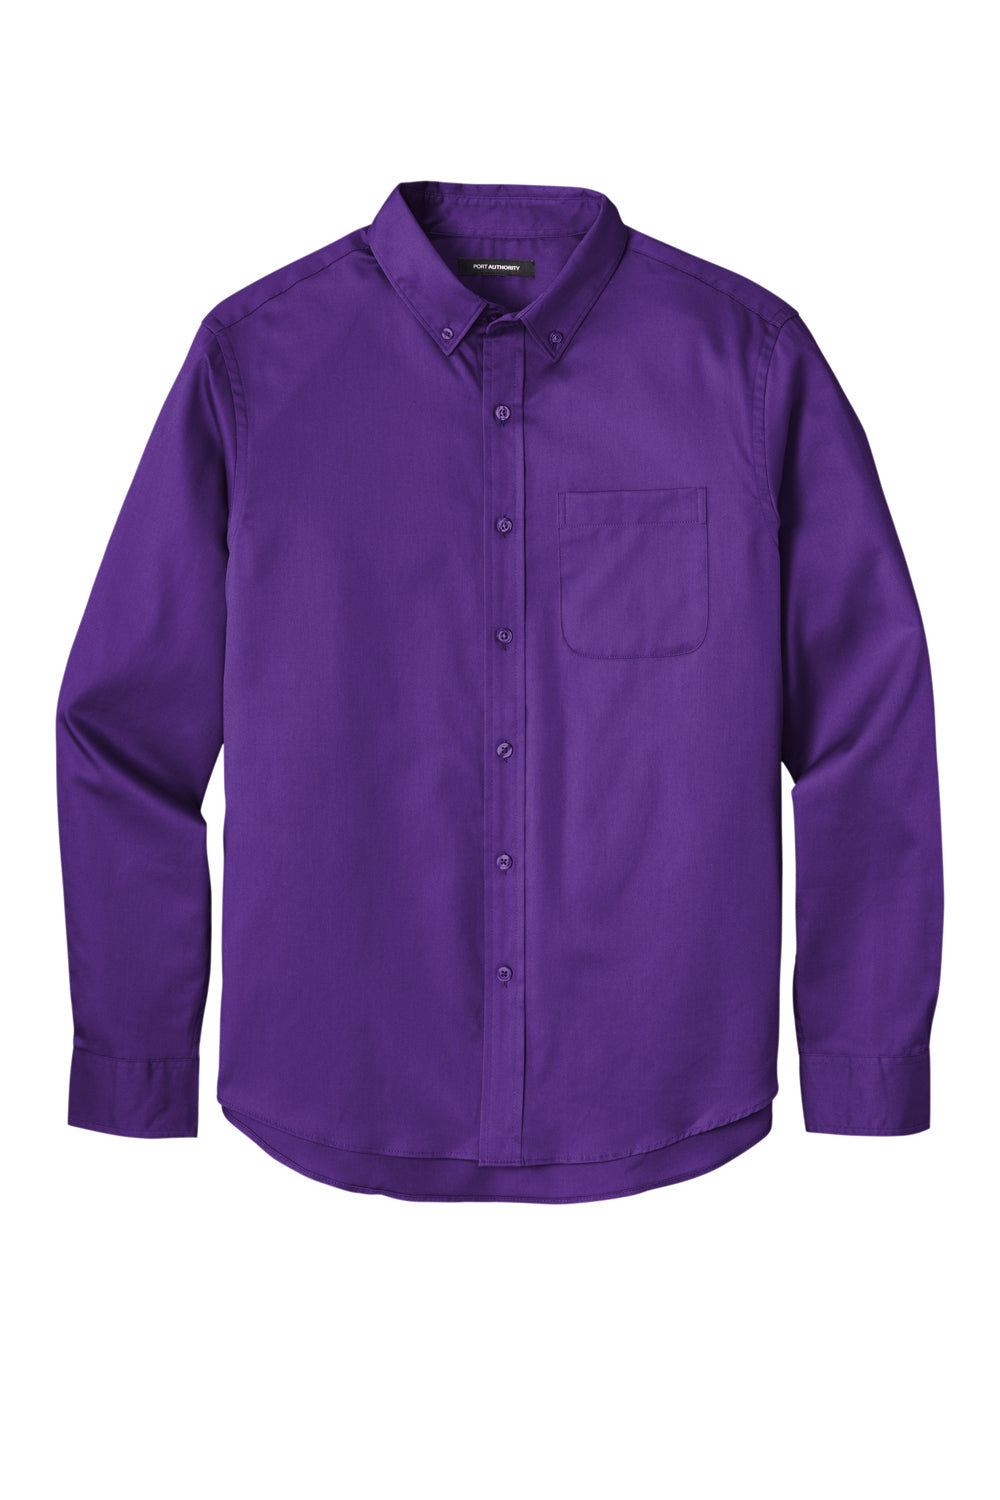 Port Authority W808 SuperPro Wrinkle Resistant React Long Sleeve Button Down Shirt w/ Pocket Purple Flat Front